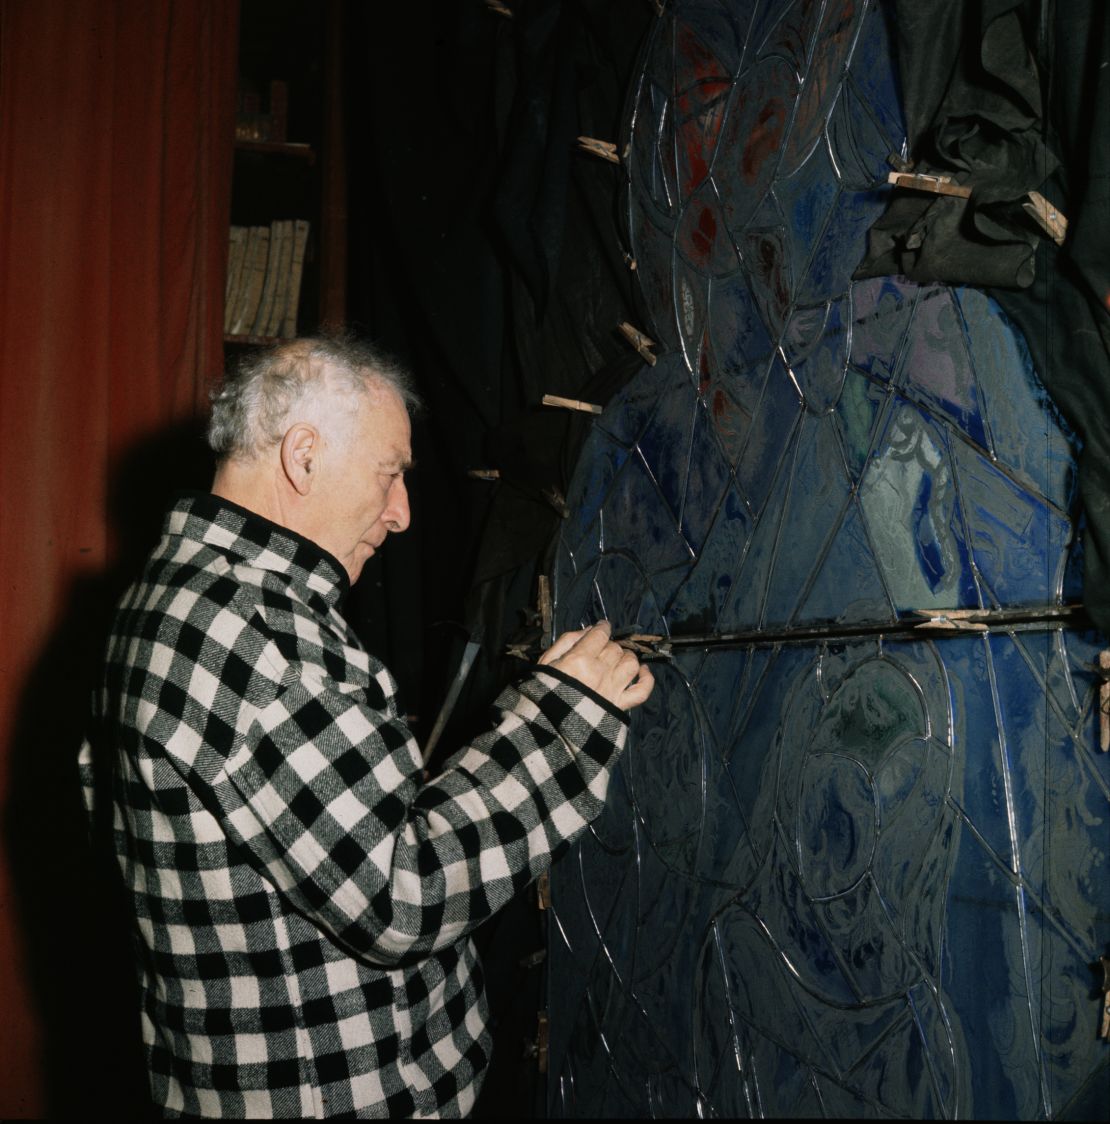 Marc Chagall works on a stained glass window for placement in Metz Cathedral.